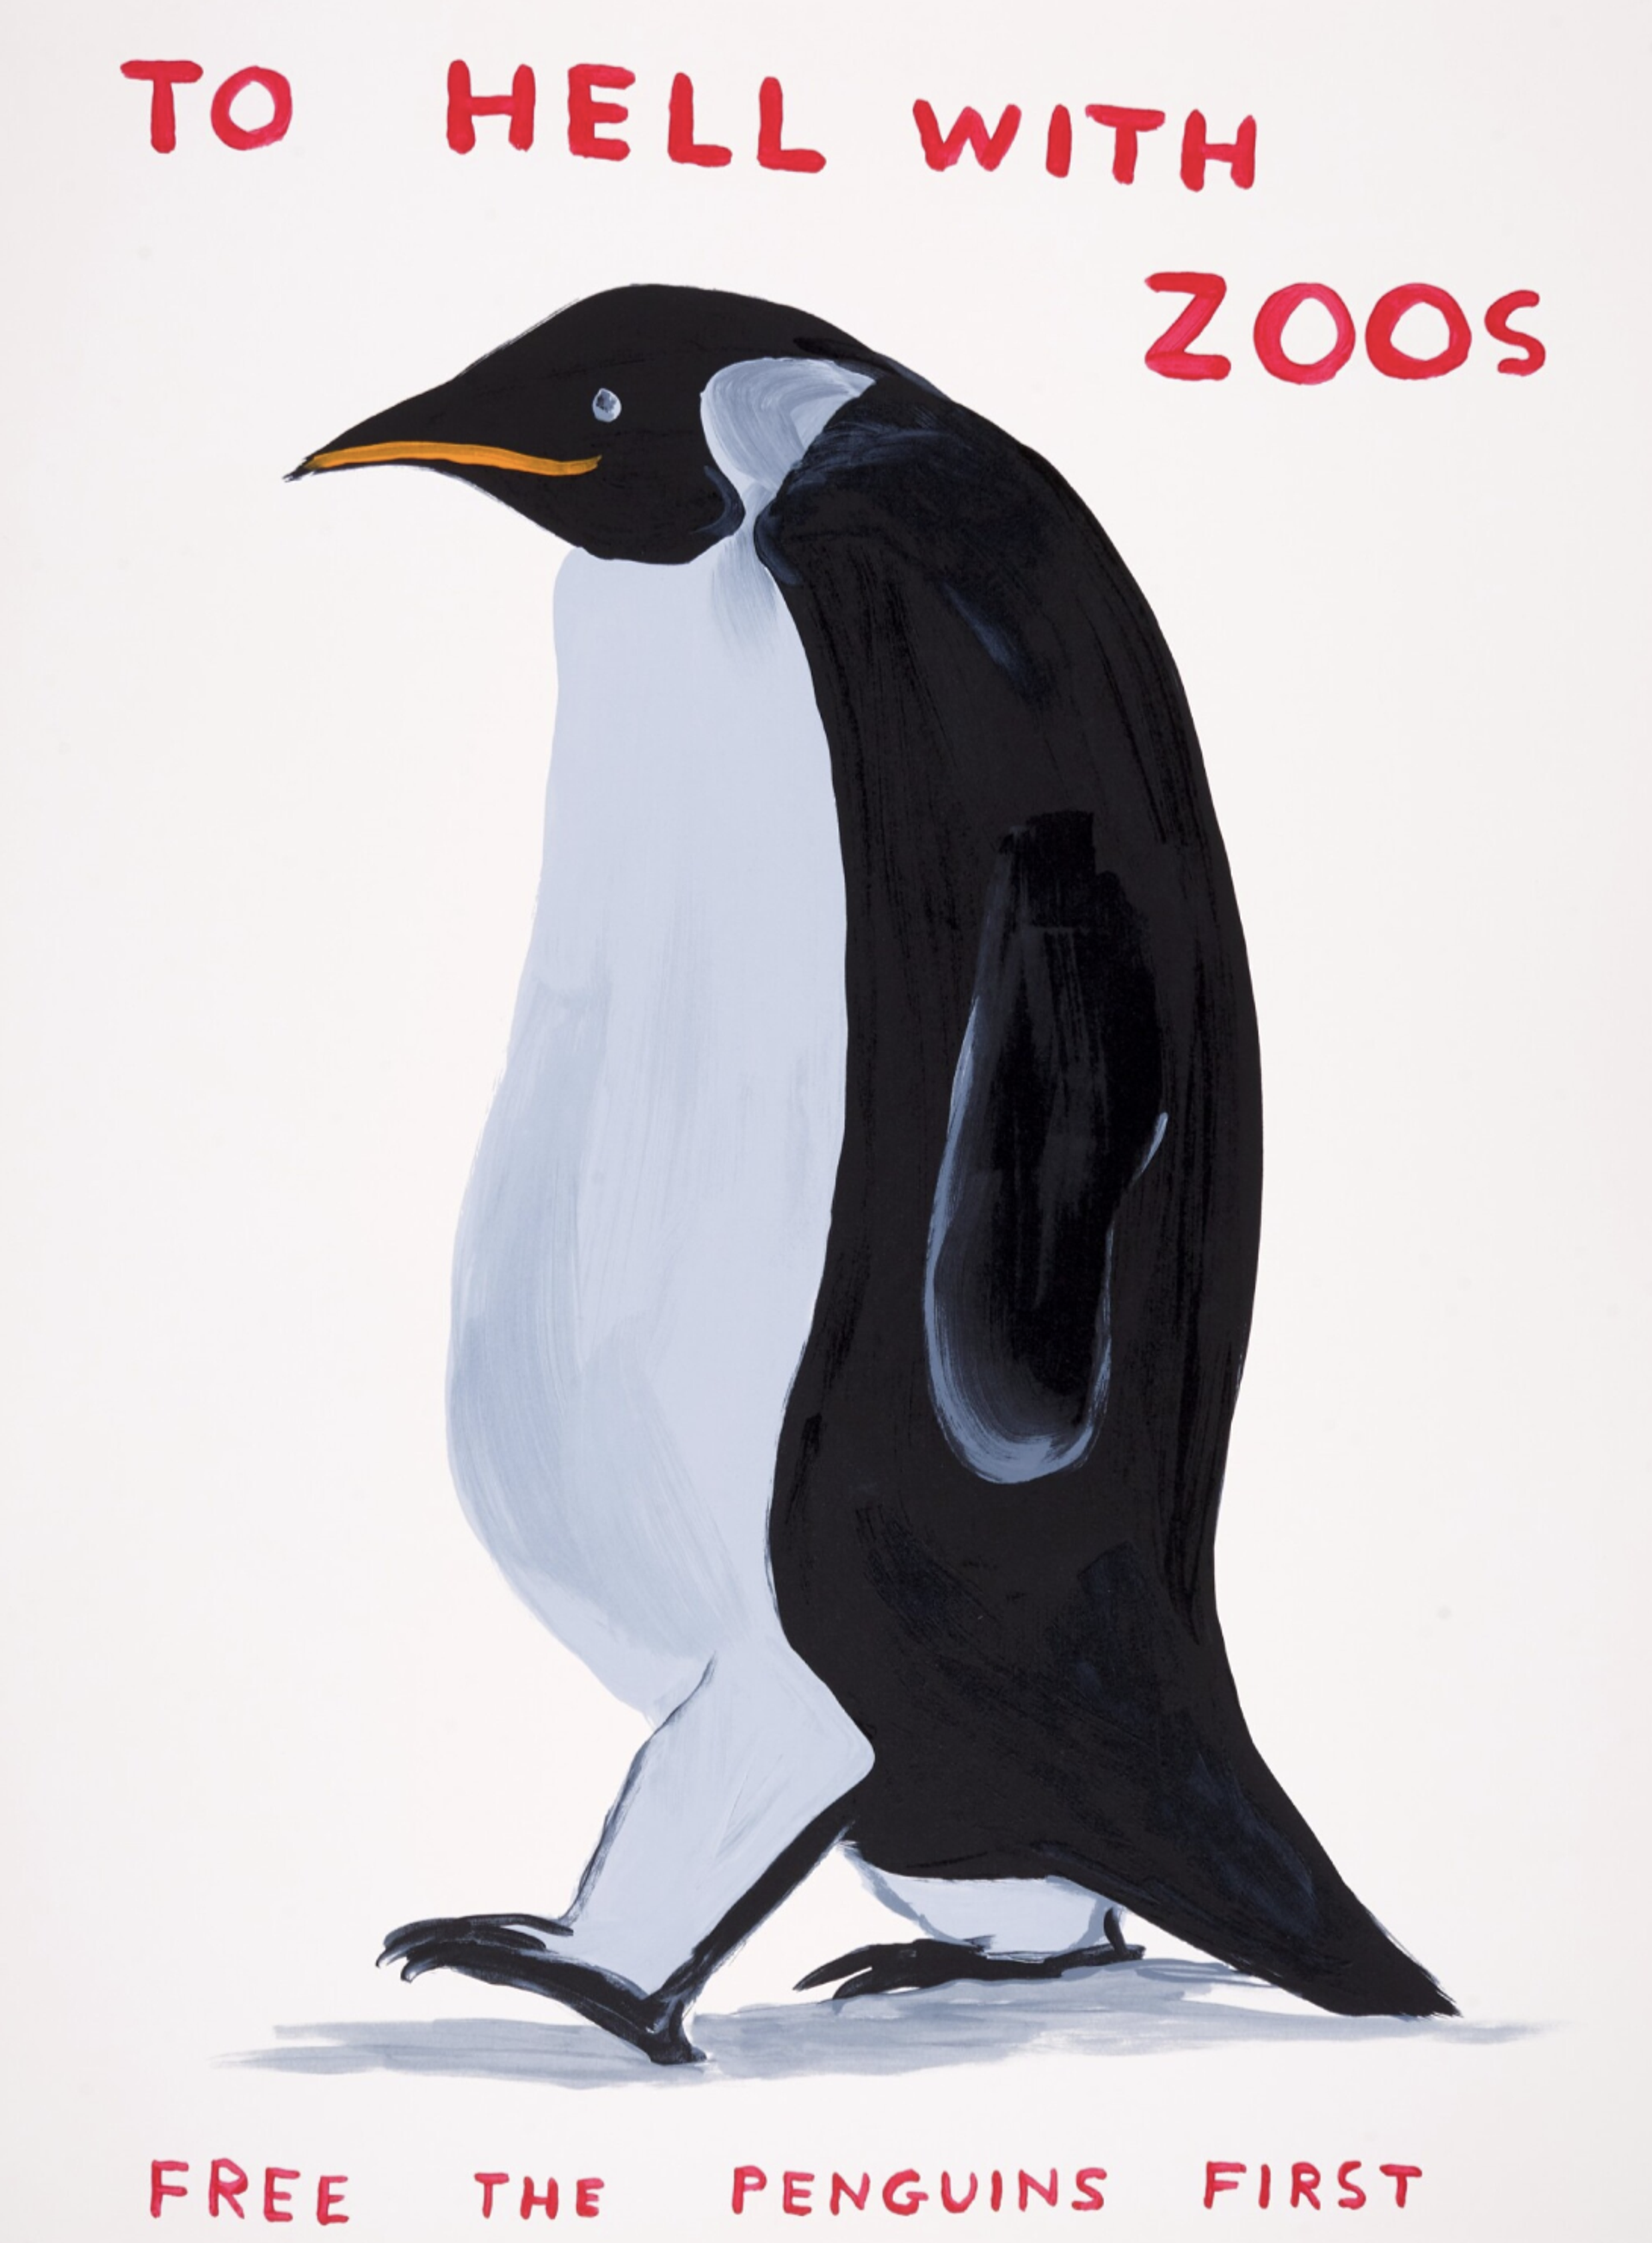 Image of a black and white penguin with “to hell with zoos... free the penguins first” written in red